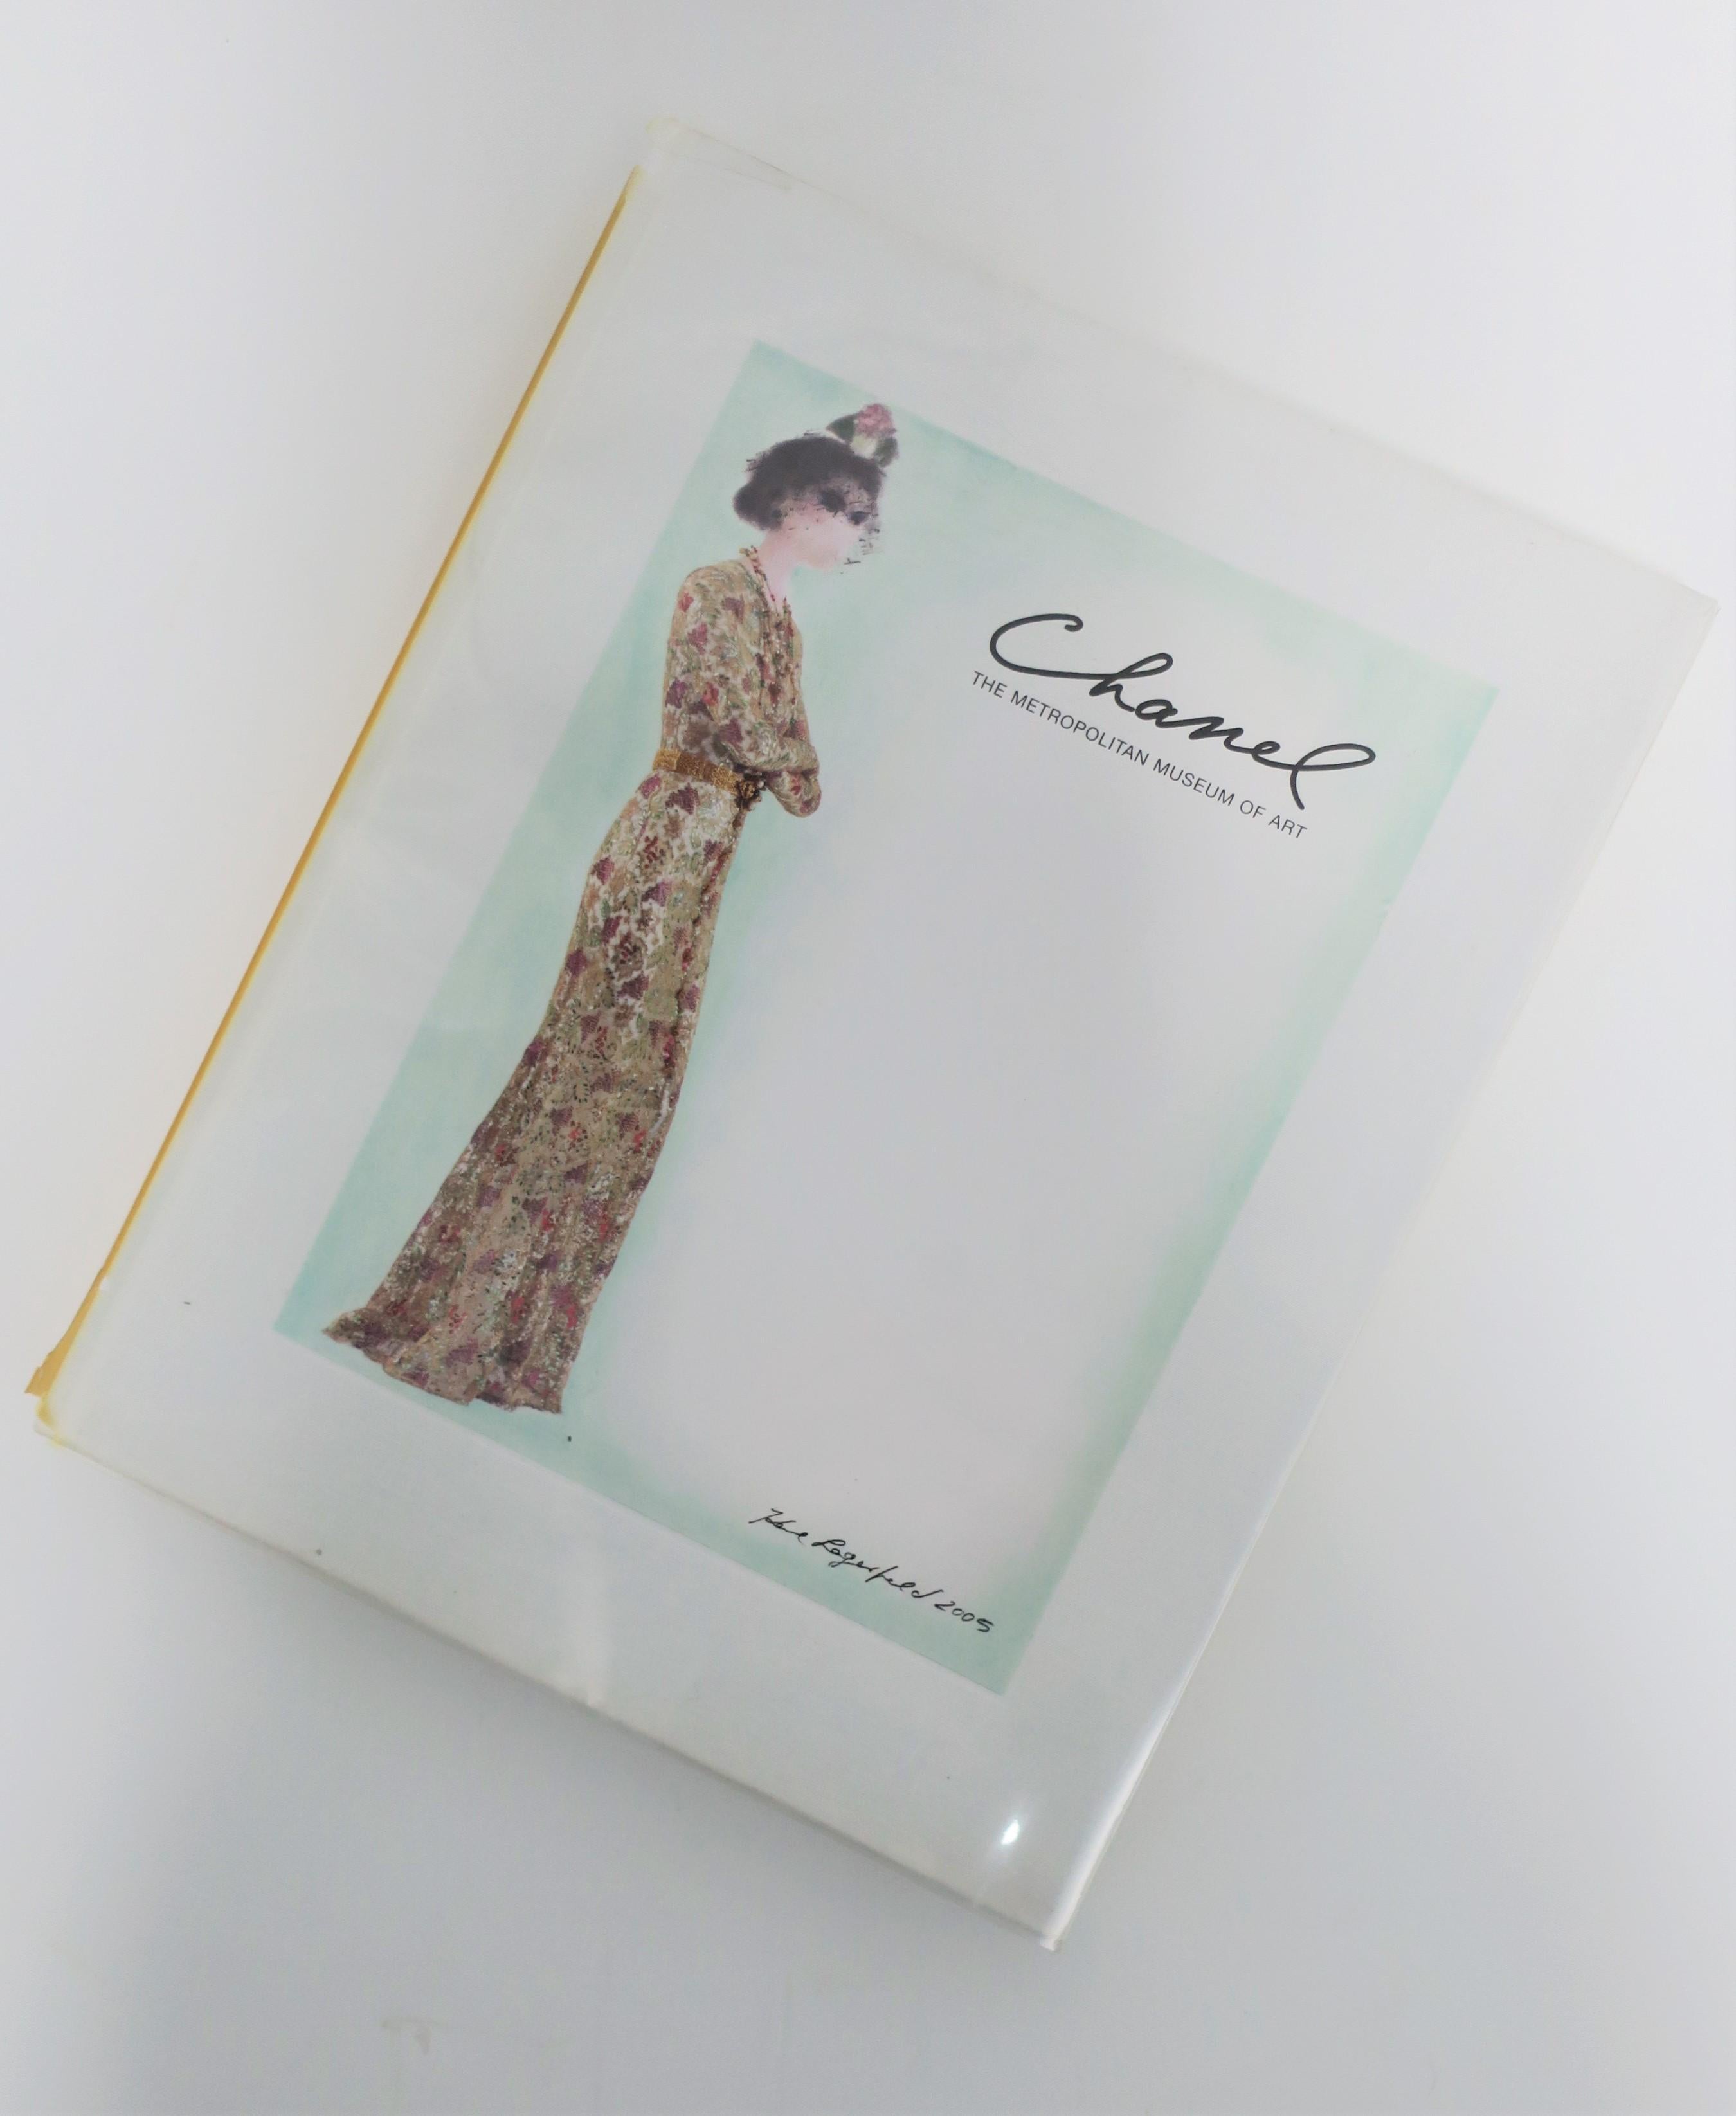 Chanel, The Metropolitan Museum of Art, 2005, New York, NY. This volume was published in conjunction with the exhibition 